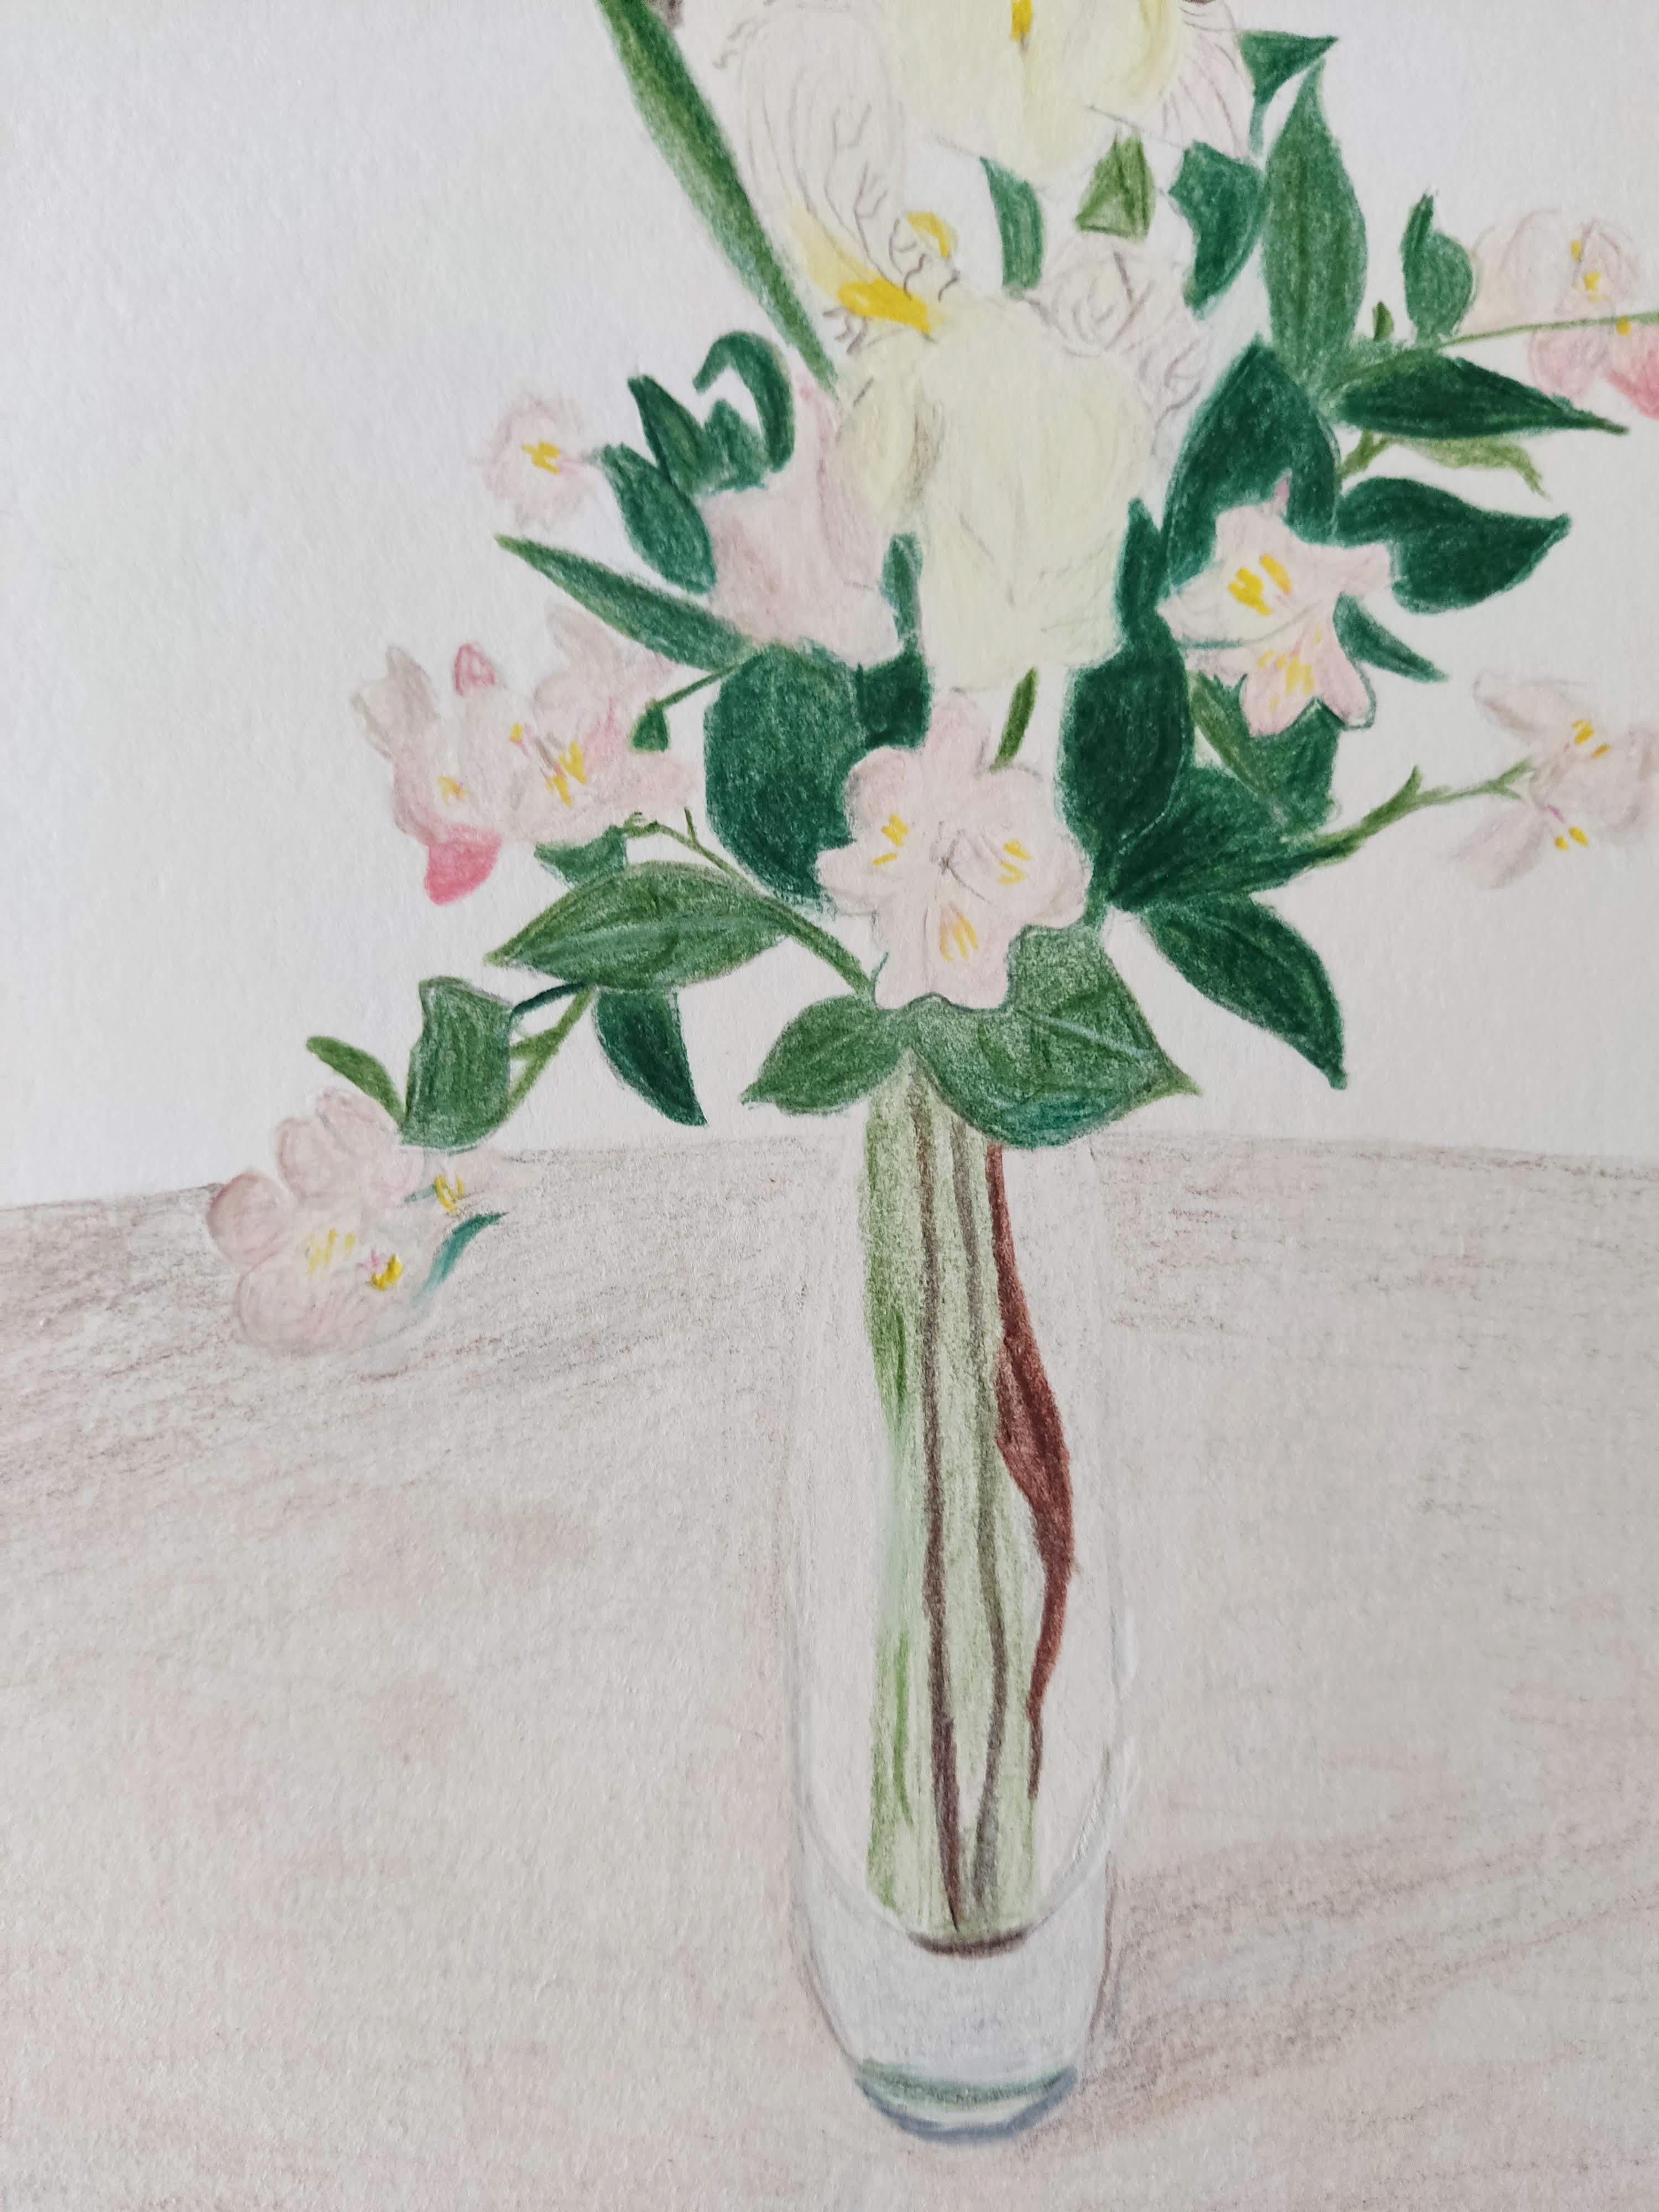 Color Pencils Caran d'Ache on museum quality cardboard 2mm - Flowers, Color Pencils, Interior
Work Title : Seringa with Vase
Artist : Gabriel Riesnert (French artist, Born in 1970, lives and works in Paris and south of France.)
The work is signed